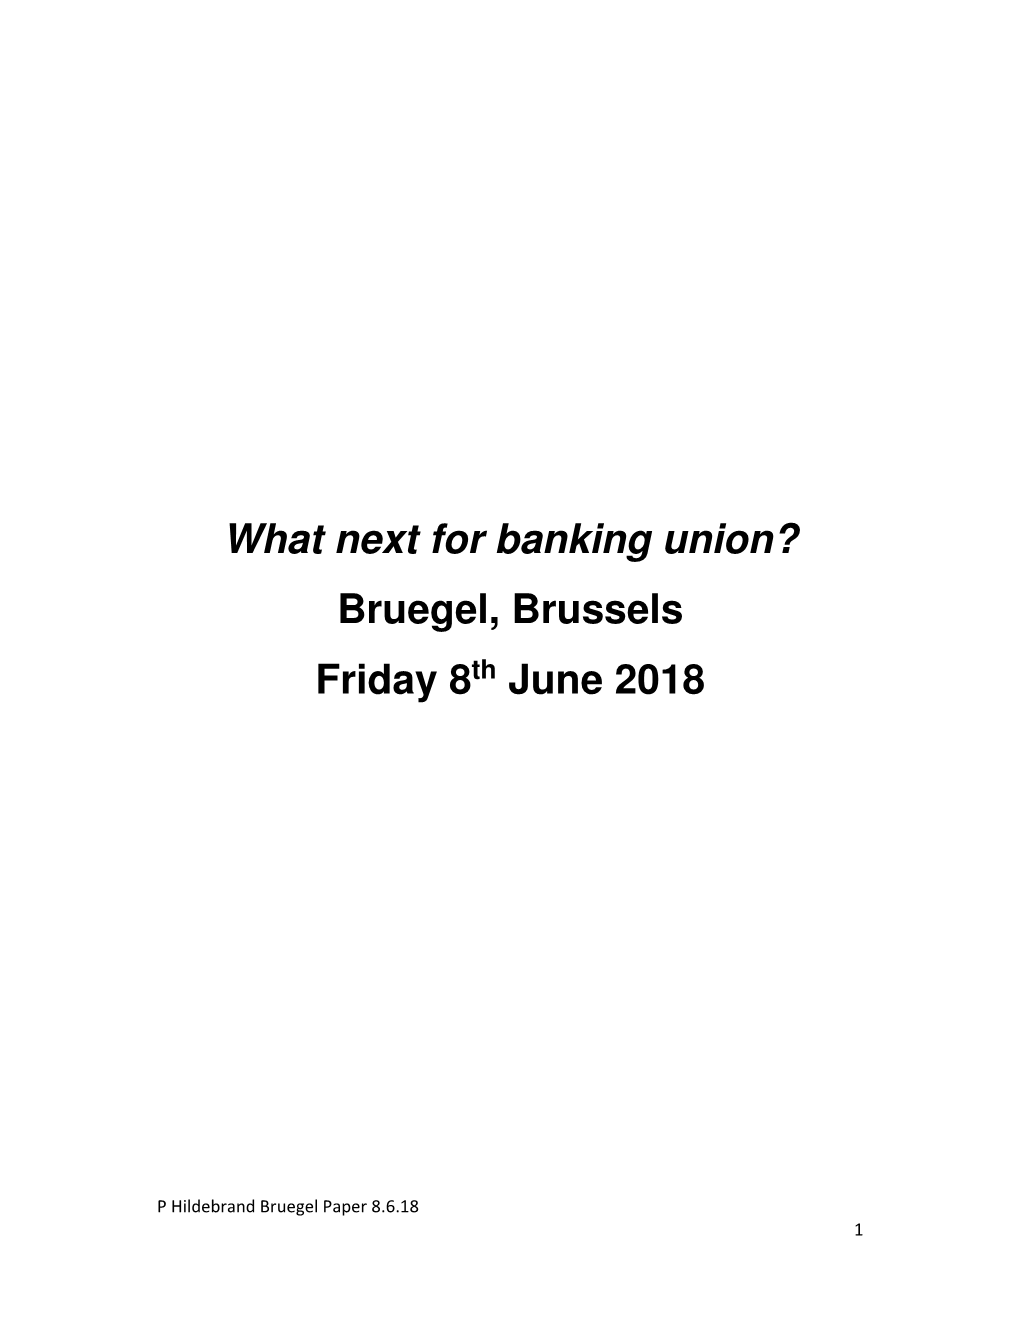 What Next for Banking Union? Bruegel, Brussels Friday 8Th June 2018